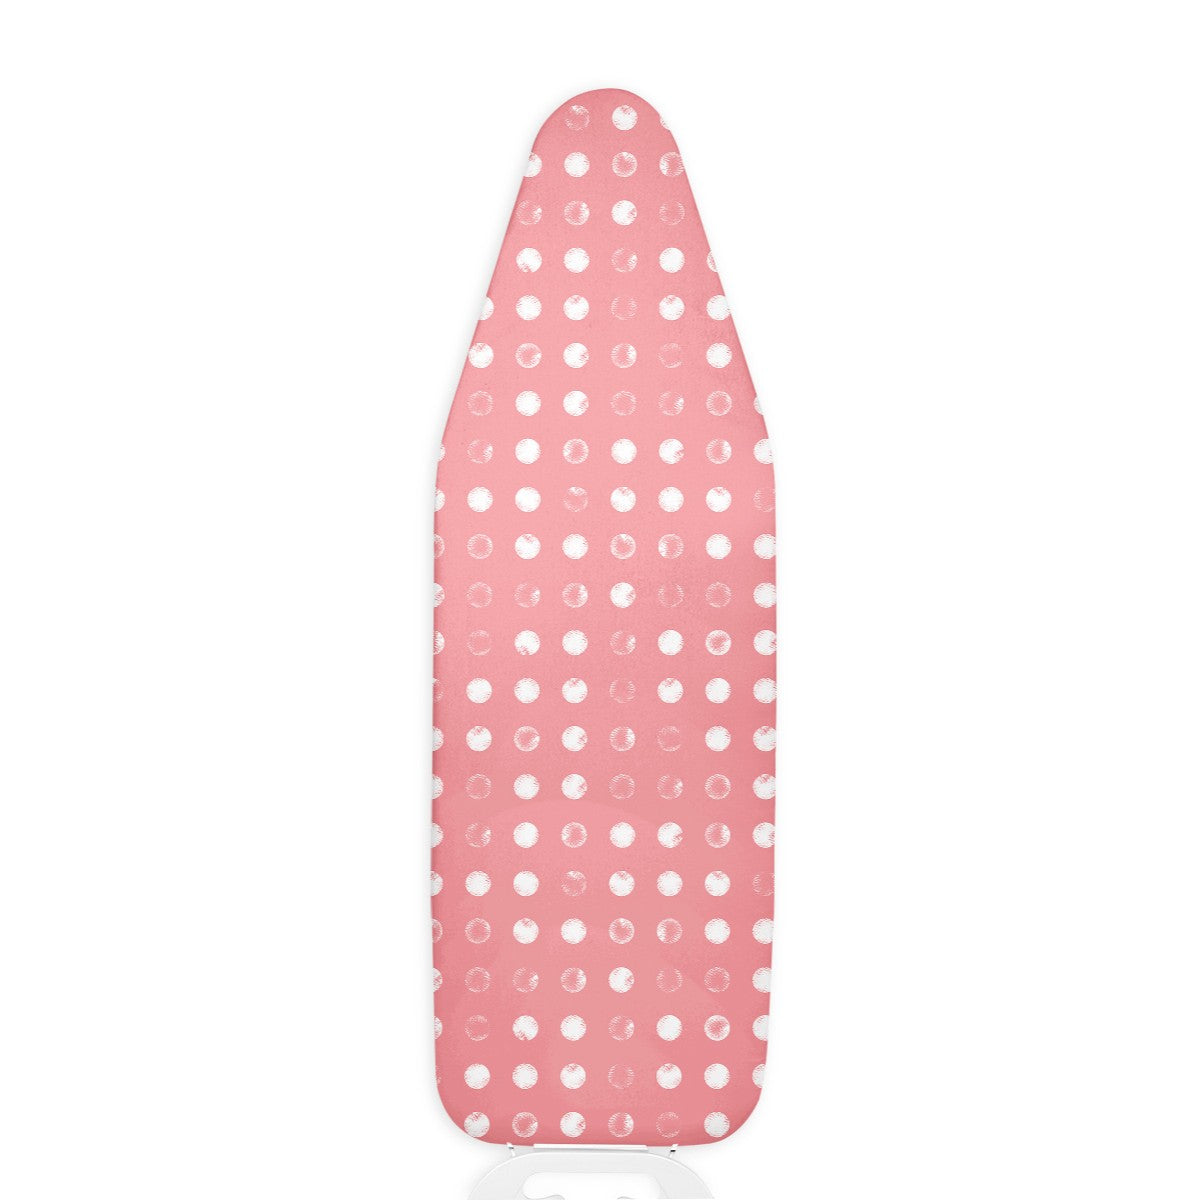 Choosing the Right Ironing Board, Pad, or Mat for Your Sewing